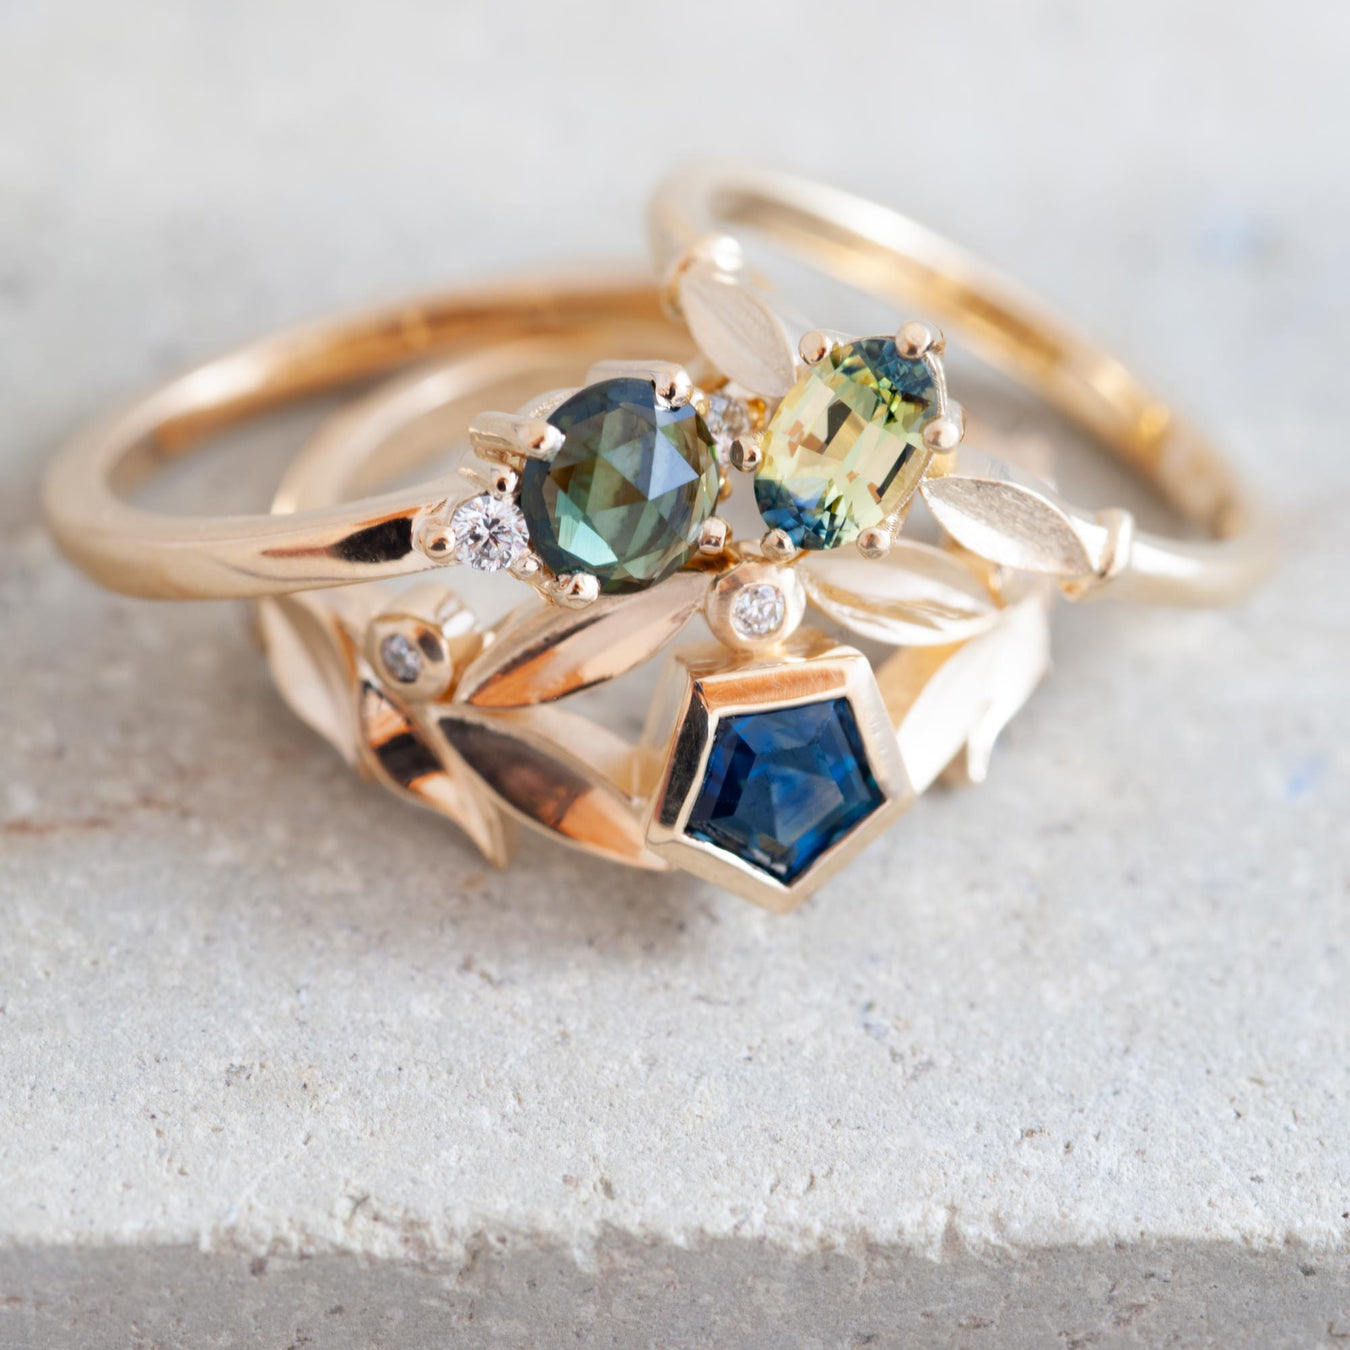 Green Blue Sapphire Engagement Rings | Era Design Vancouver Canada